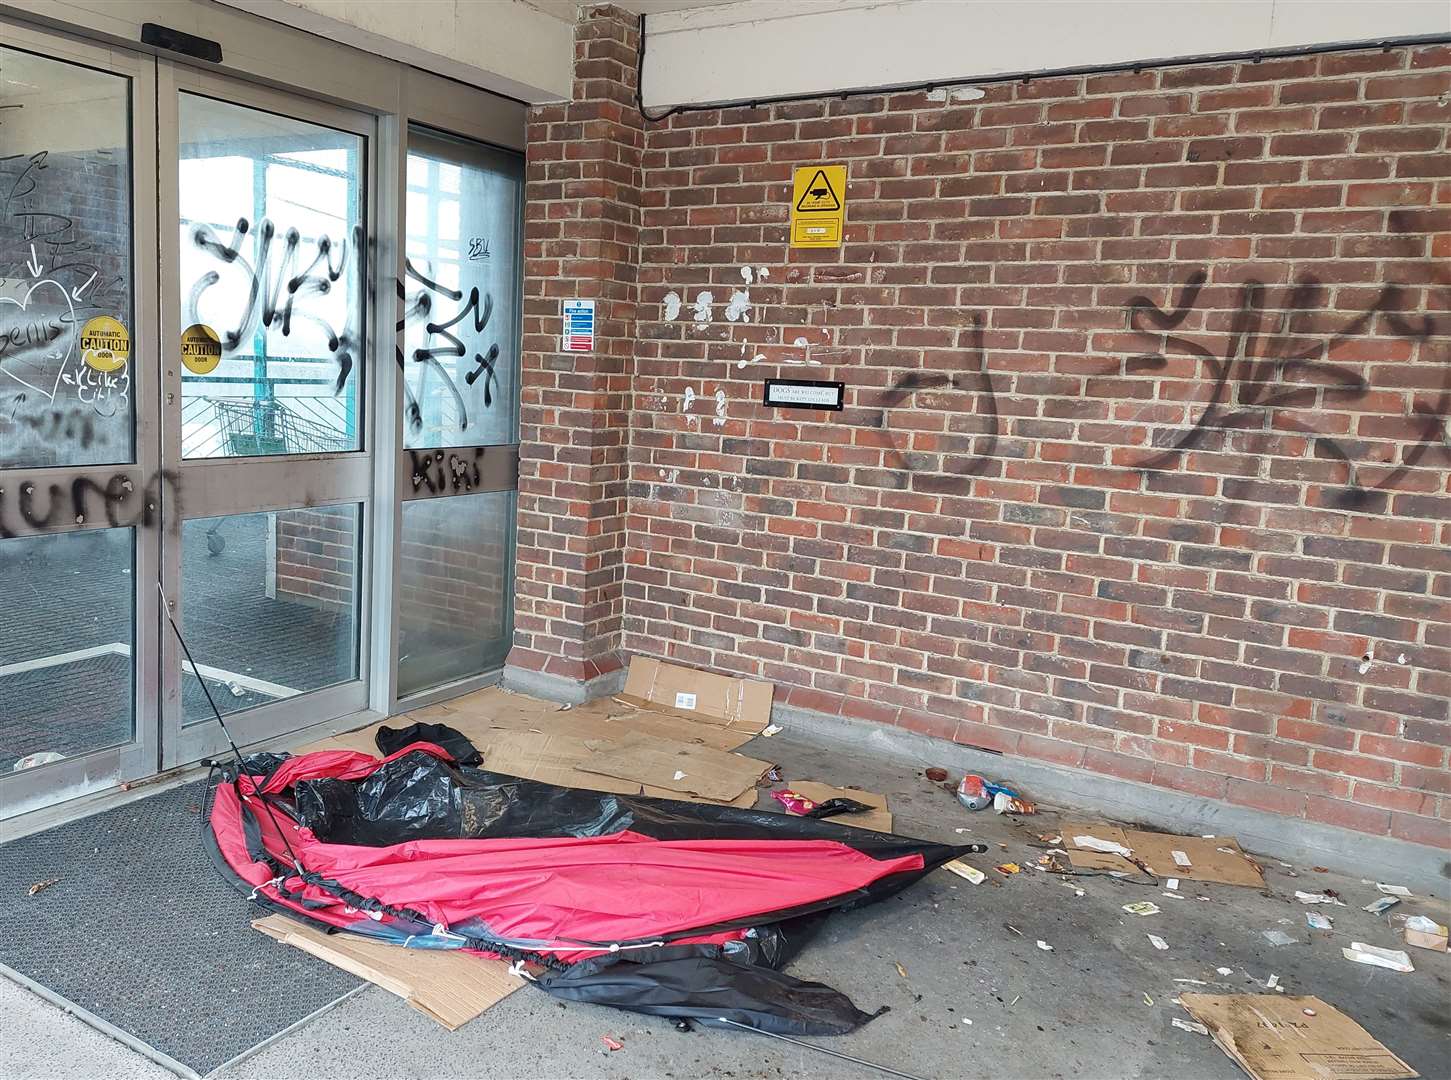 Vandals have graffitied the walls and it appears someone was sleeping in a tent